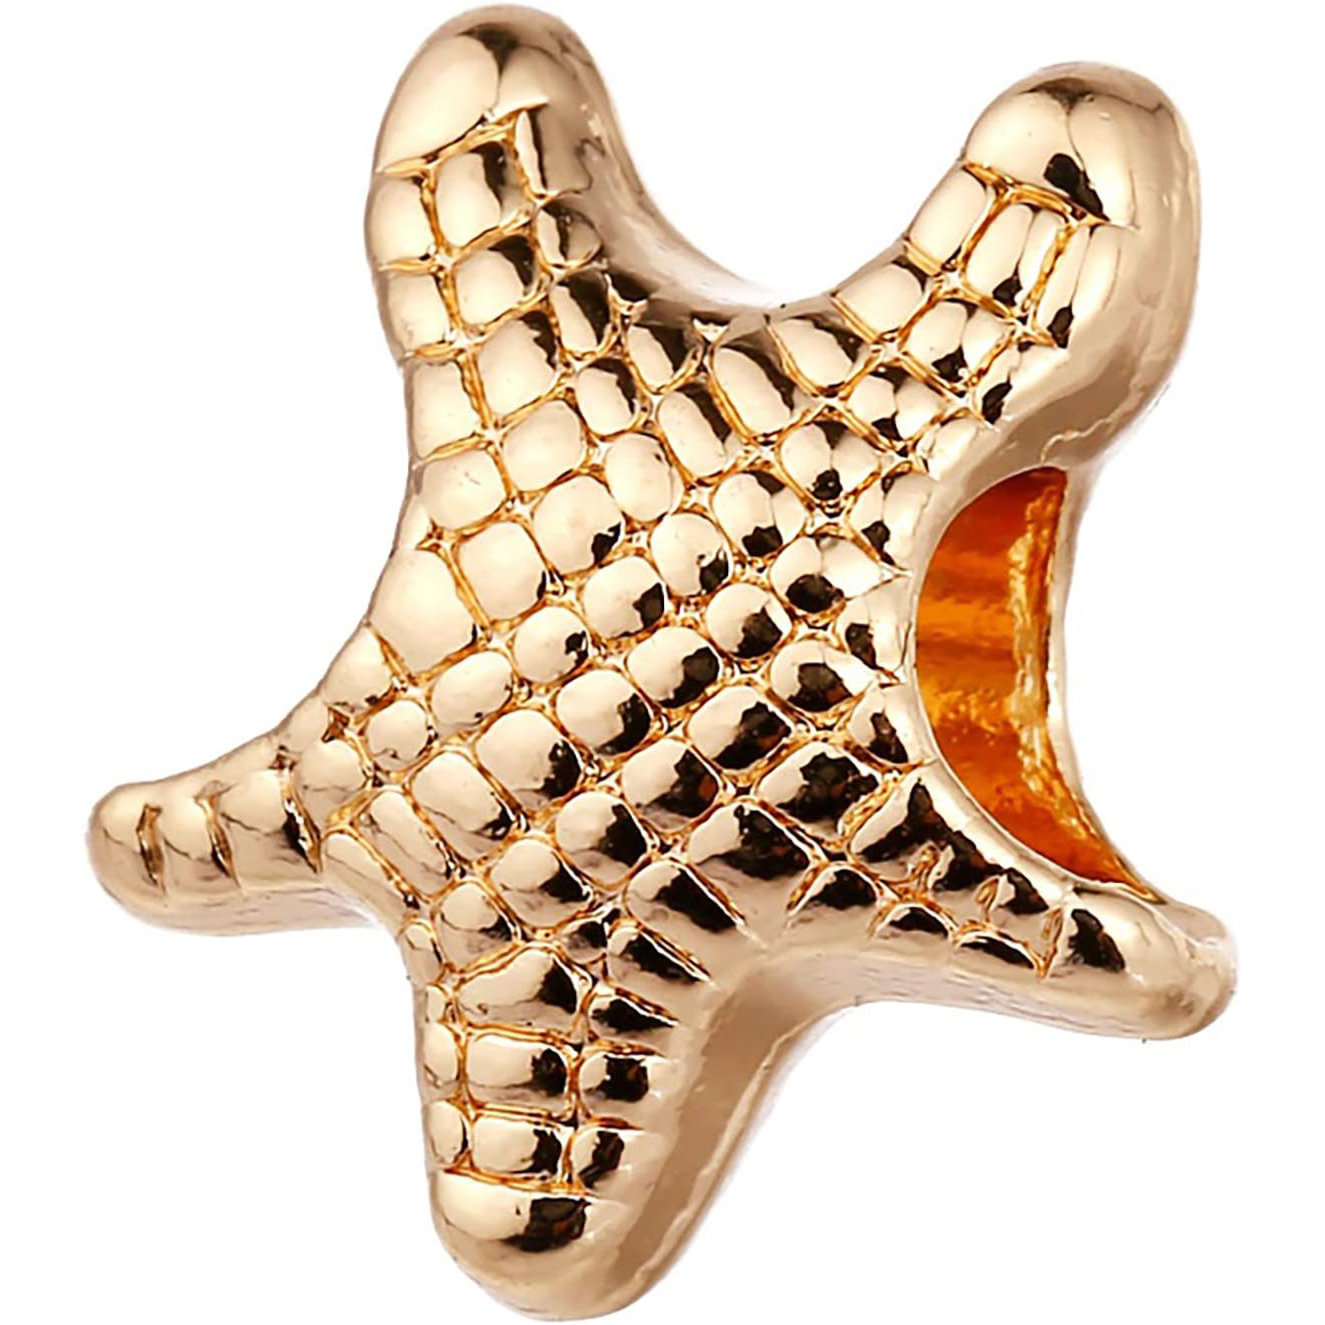 10pcs DIY Starfish Beads for Jewelry Making, KC Gold Beads for Bracelets  Making, Cute Large Hole Beads Charms for Bracelet for Jewelry Making,  Bracelet Spacer Beads